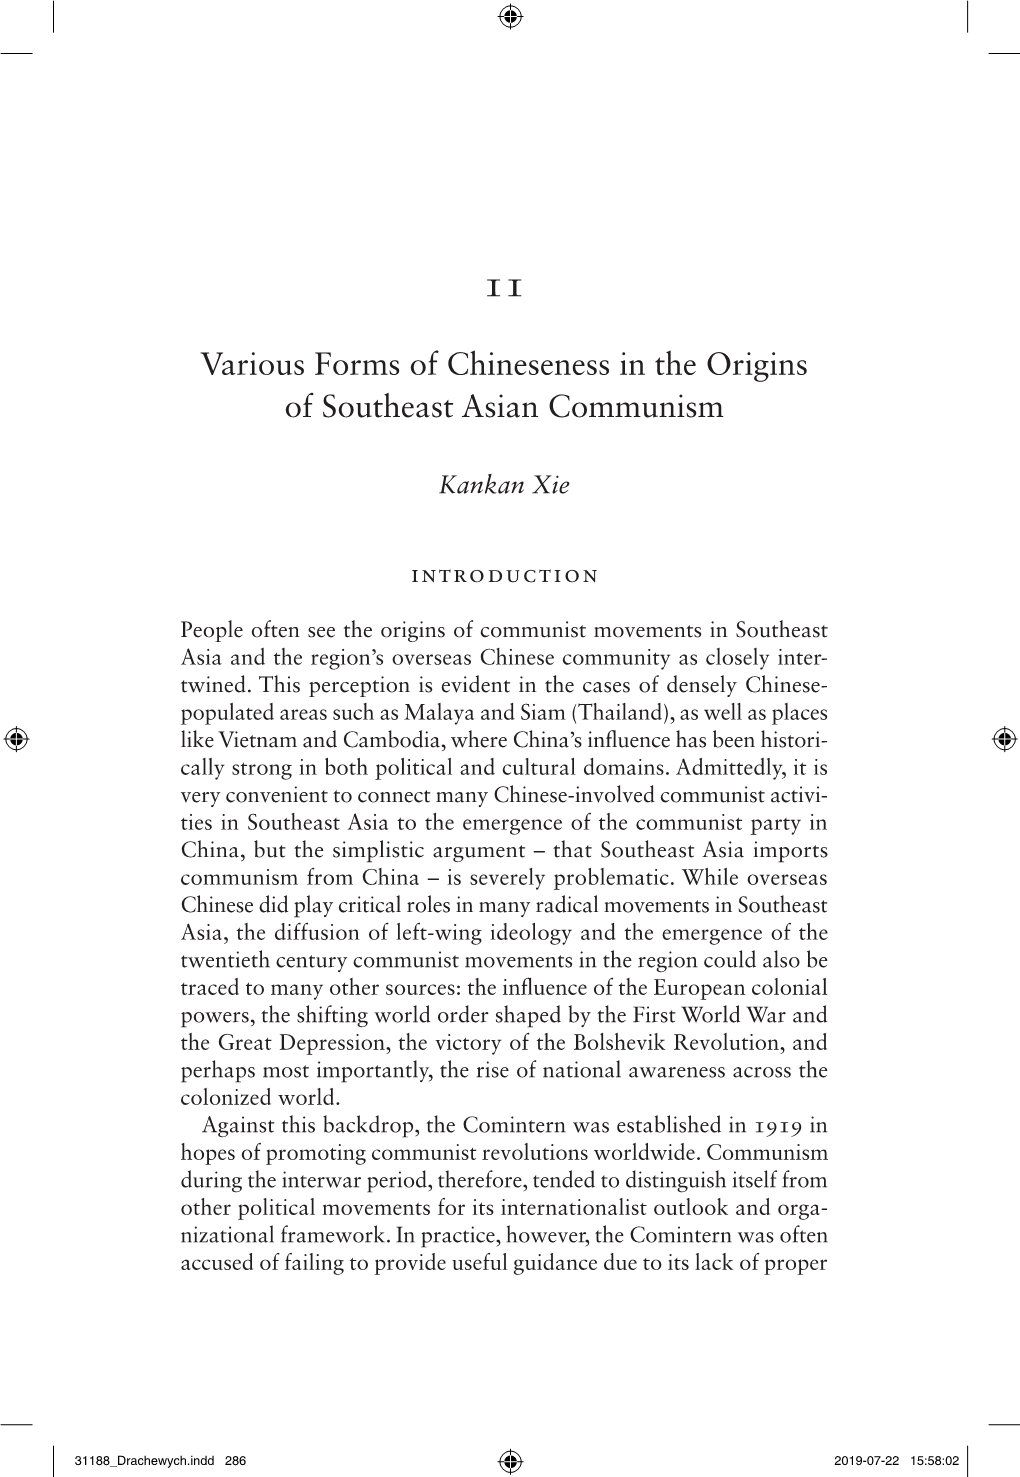 Various Forms of Chineseness in the Origins of Southeast Asian Communism